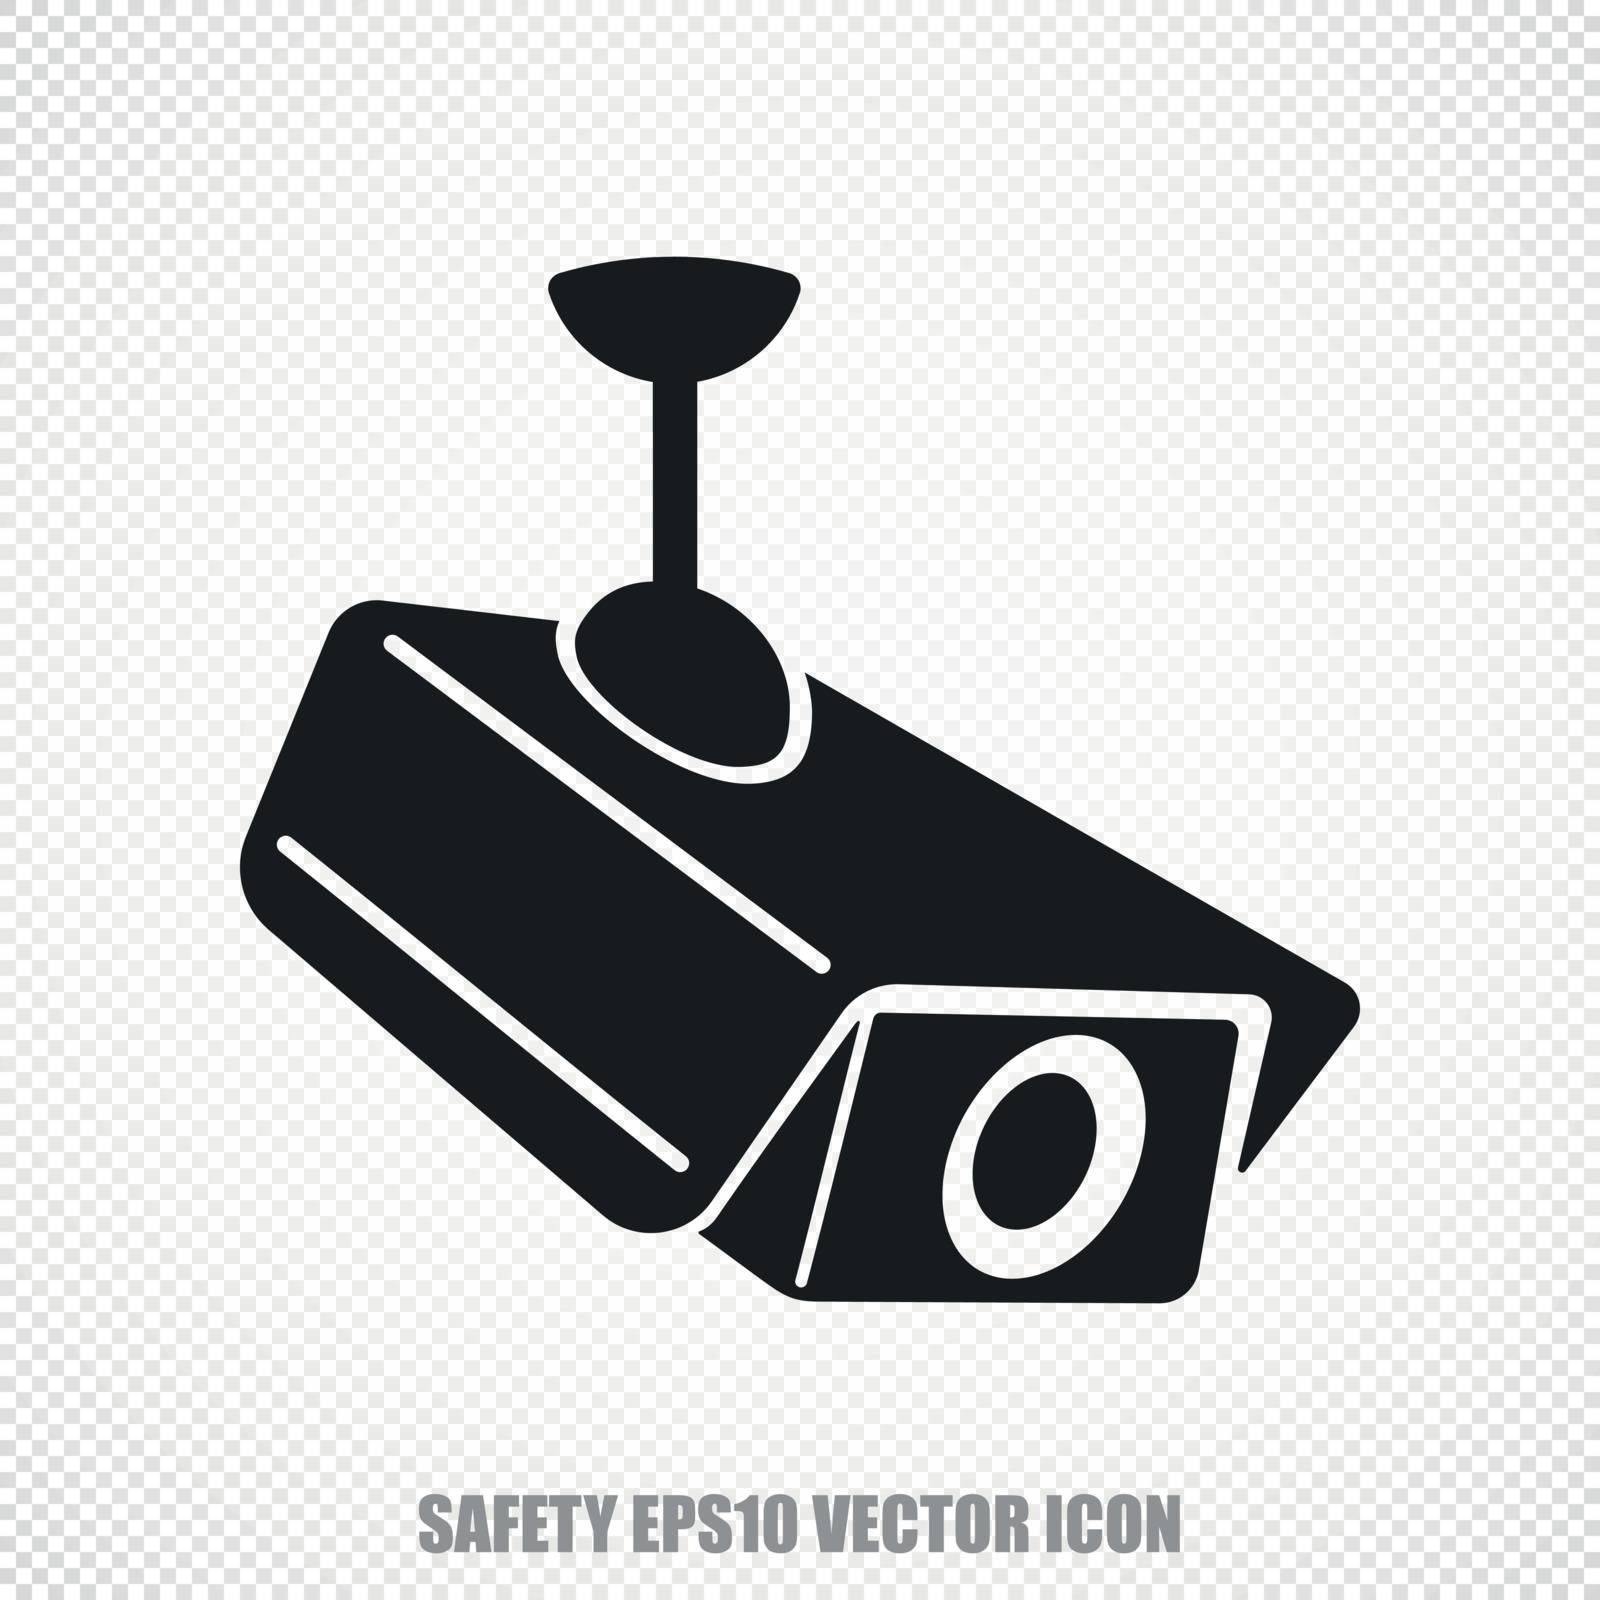 The universal vector icon on the safety theme: Black Cctv Camera. Modern flat design. For mobile and web design. EPS 10.